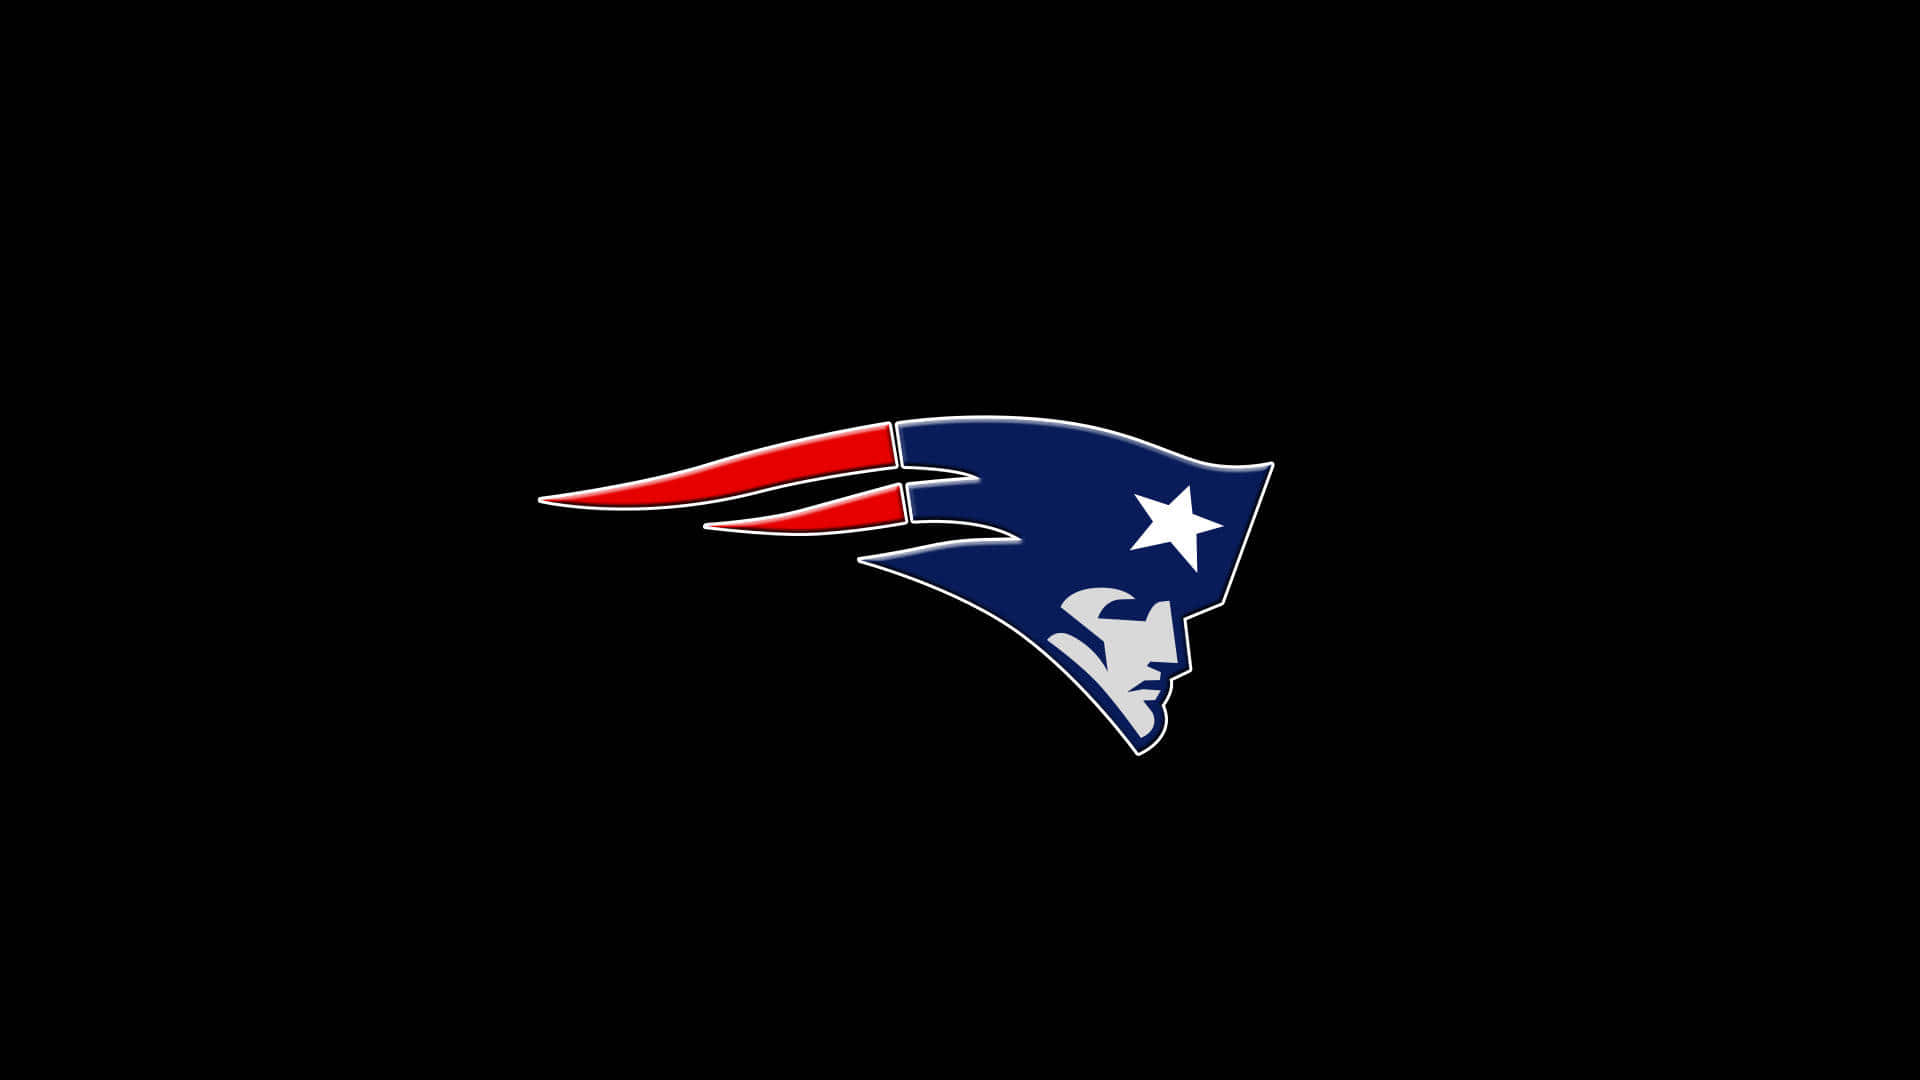 America’s Super Bowl Champions, The New England Patriots Background